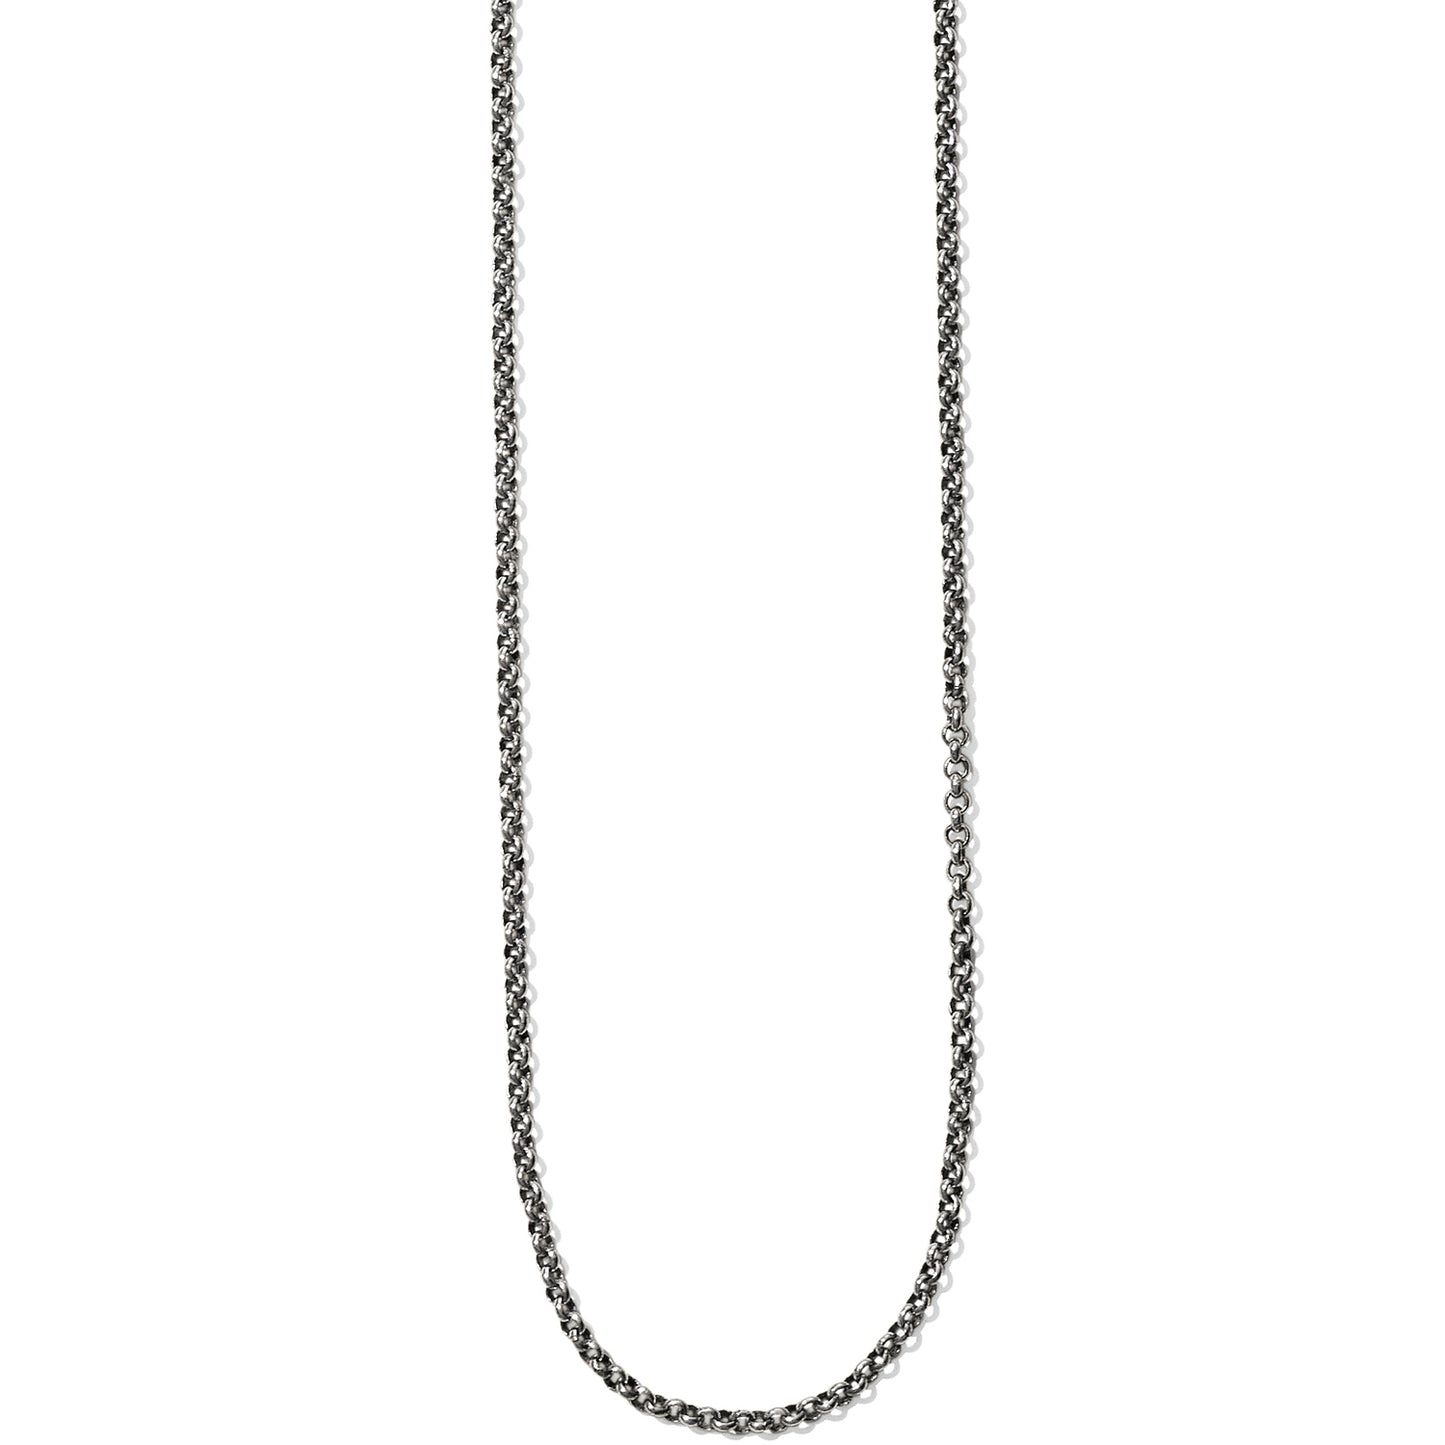 Vivi Delicate Long Charm Necklace - Jewelry - SierraLily